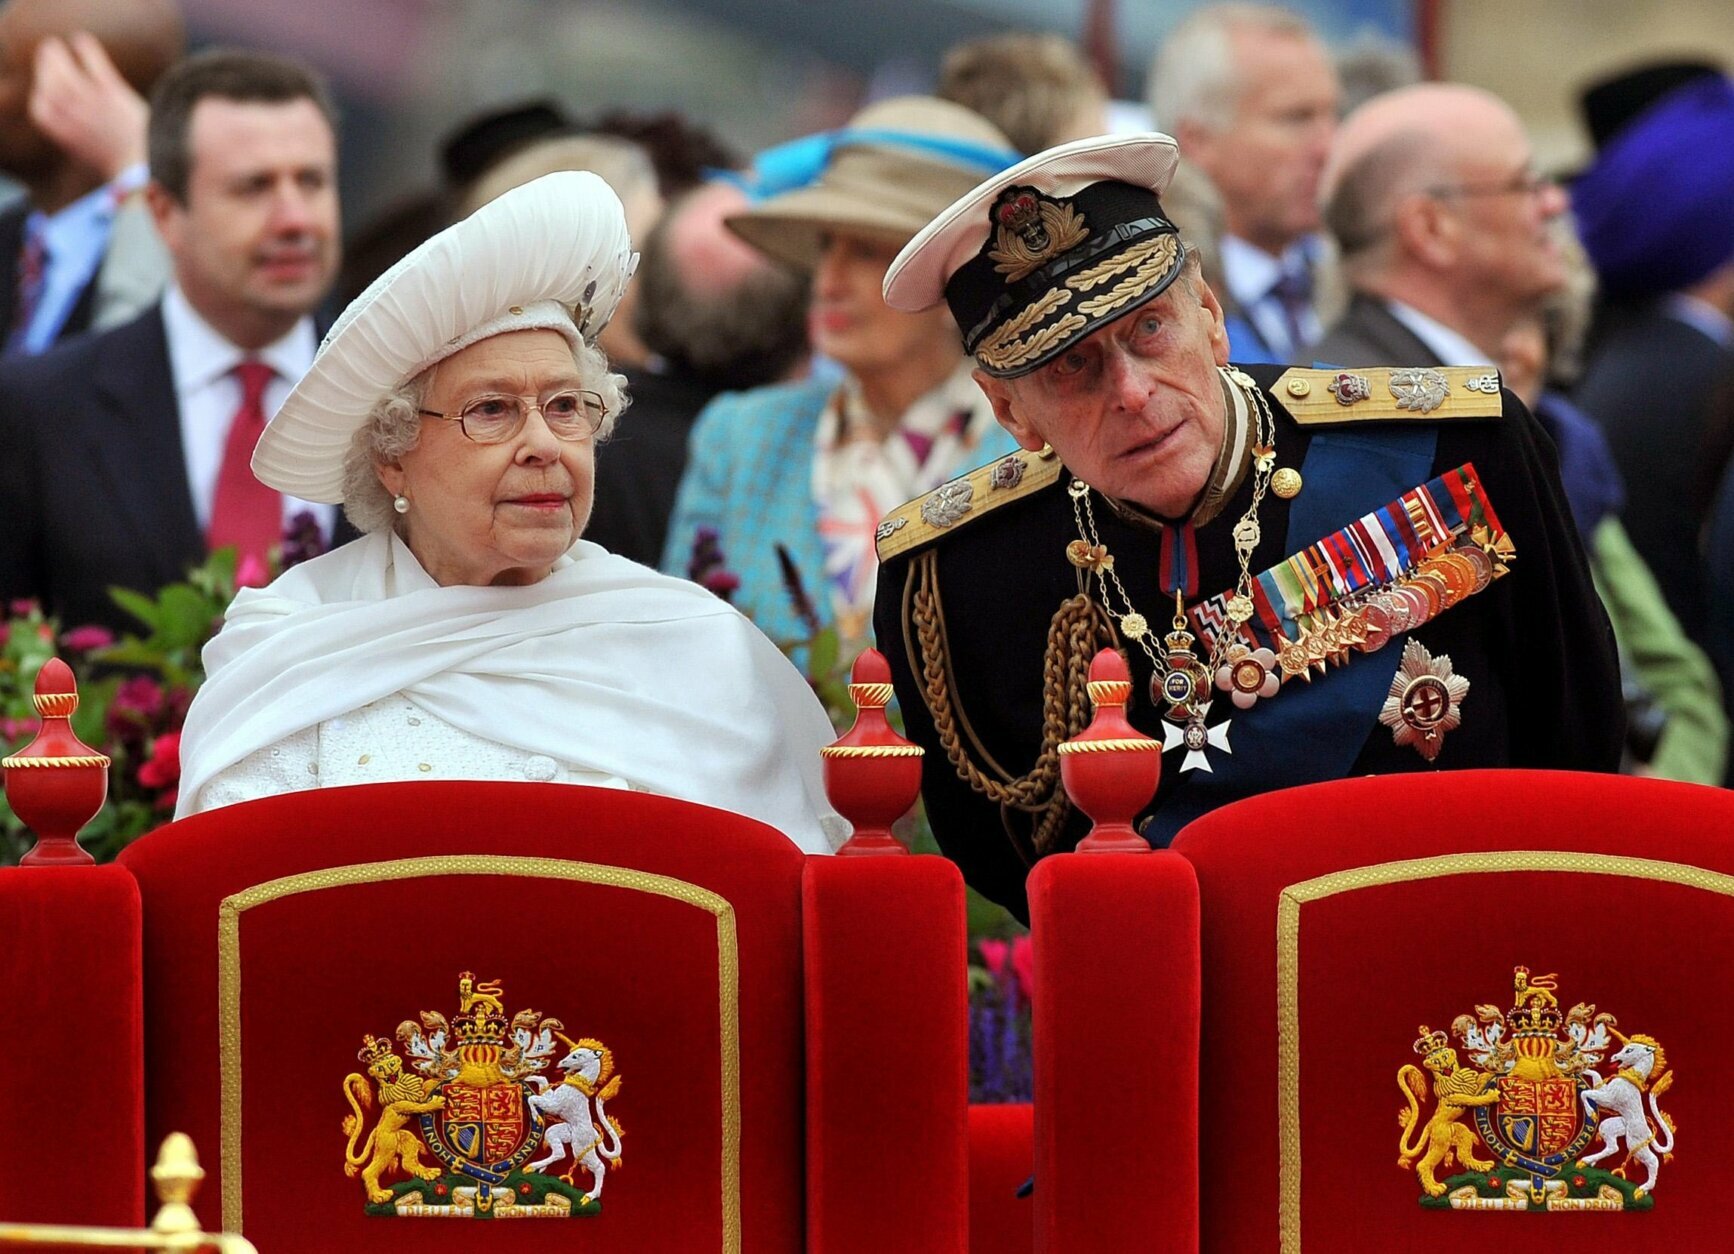 FILE - In this Sunday June 3, 2012 file photo, Britain's Queen Elizabeth II and her husband Prince Philip watches the proceedings from the royal barge during the Diamond Jubilee Pageant on the River Thames in London. Buckingham Palace says Prince Philip, husband of Queen Elizabeth II, has died aged 99.(AP Photo/John Stillwell, Pool, File)